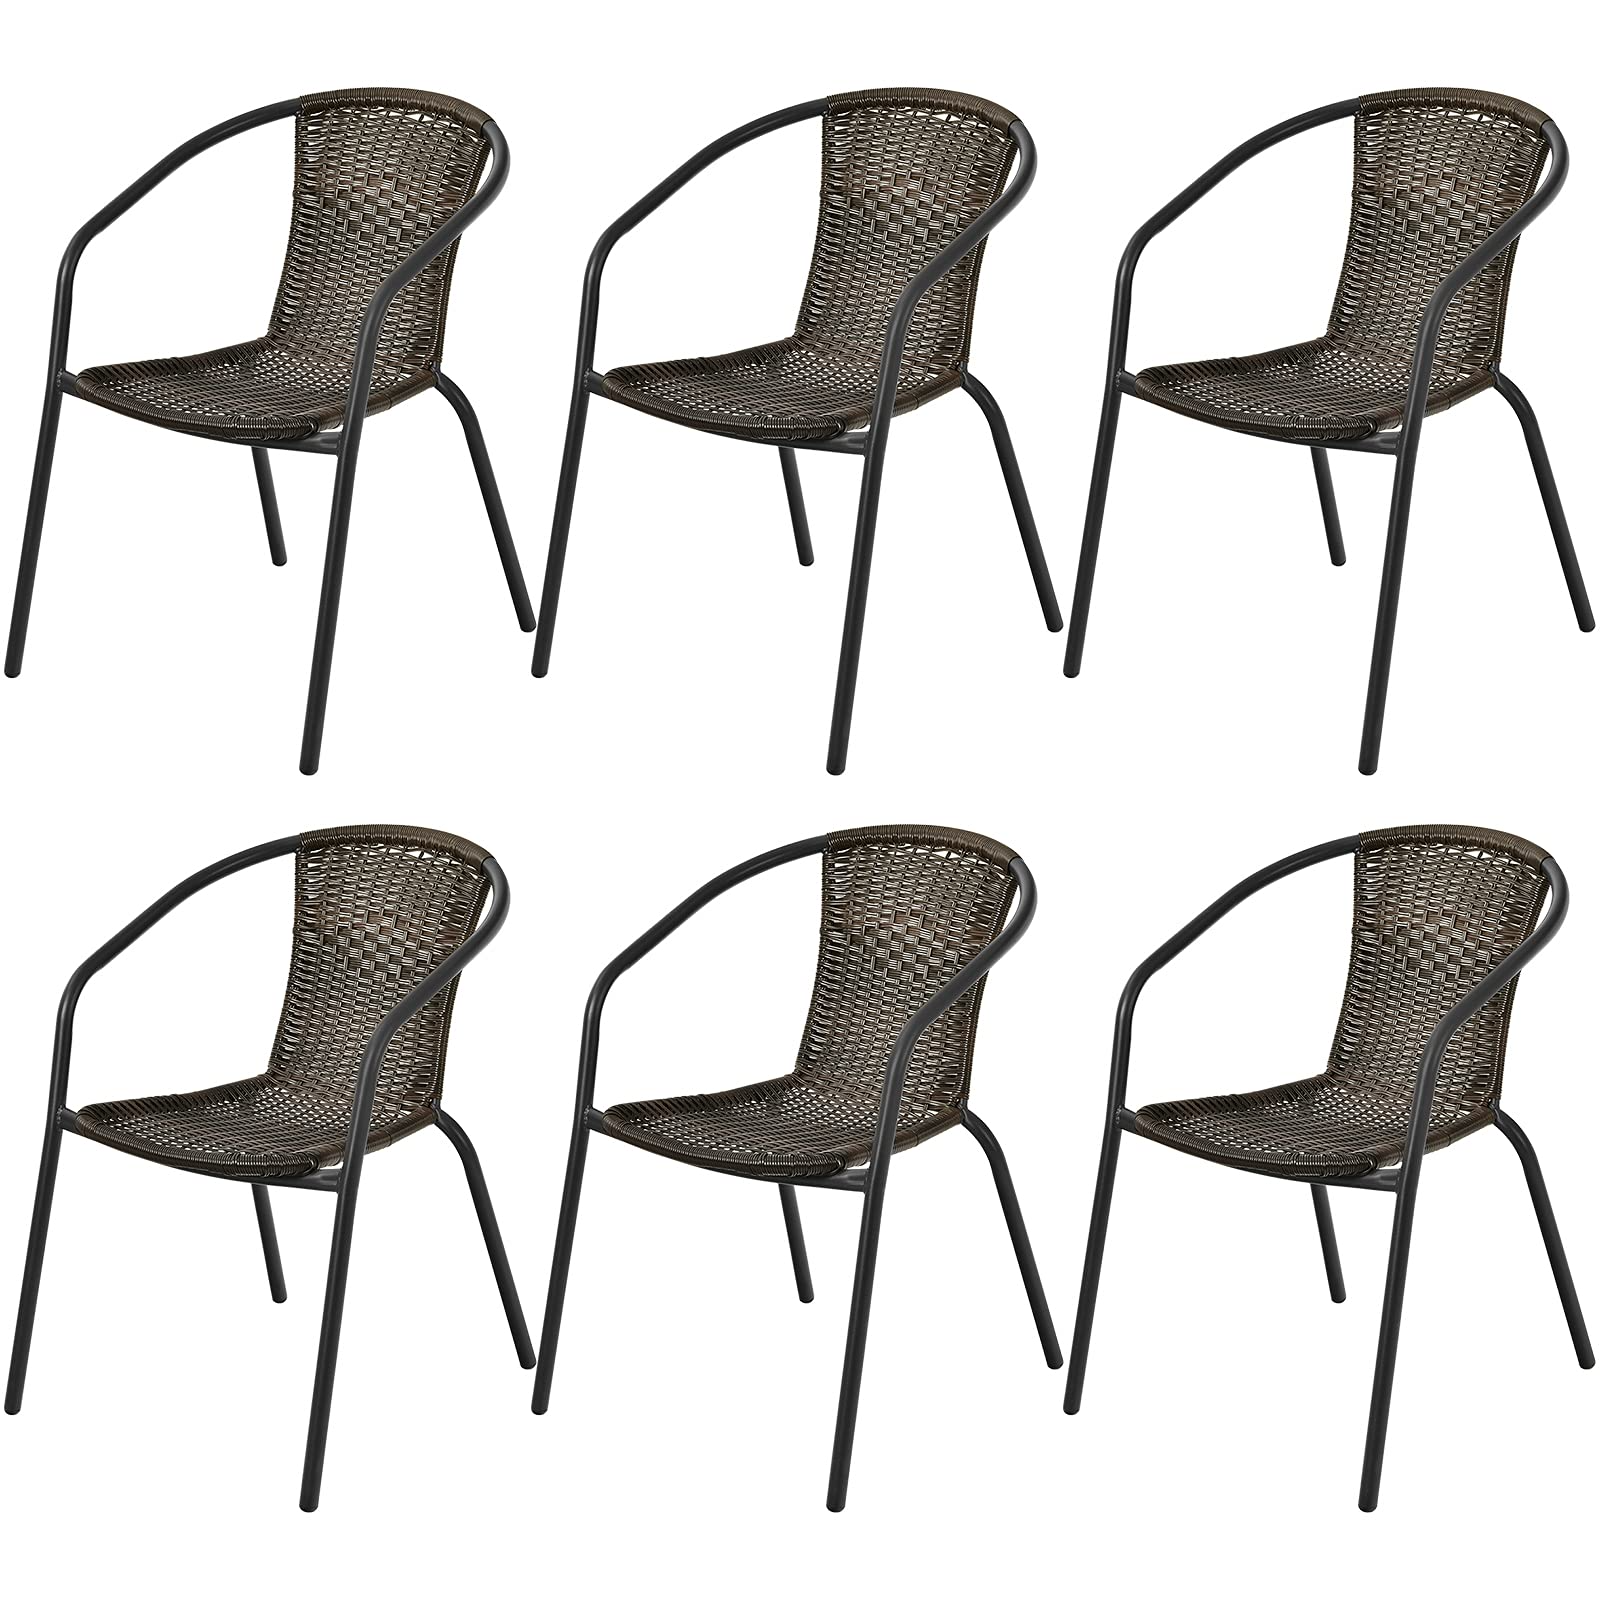 Giantex Outdoor Chairs Rattan Dining Chair